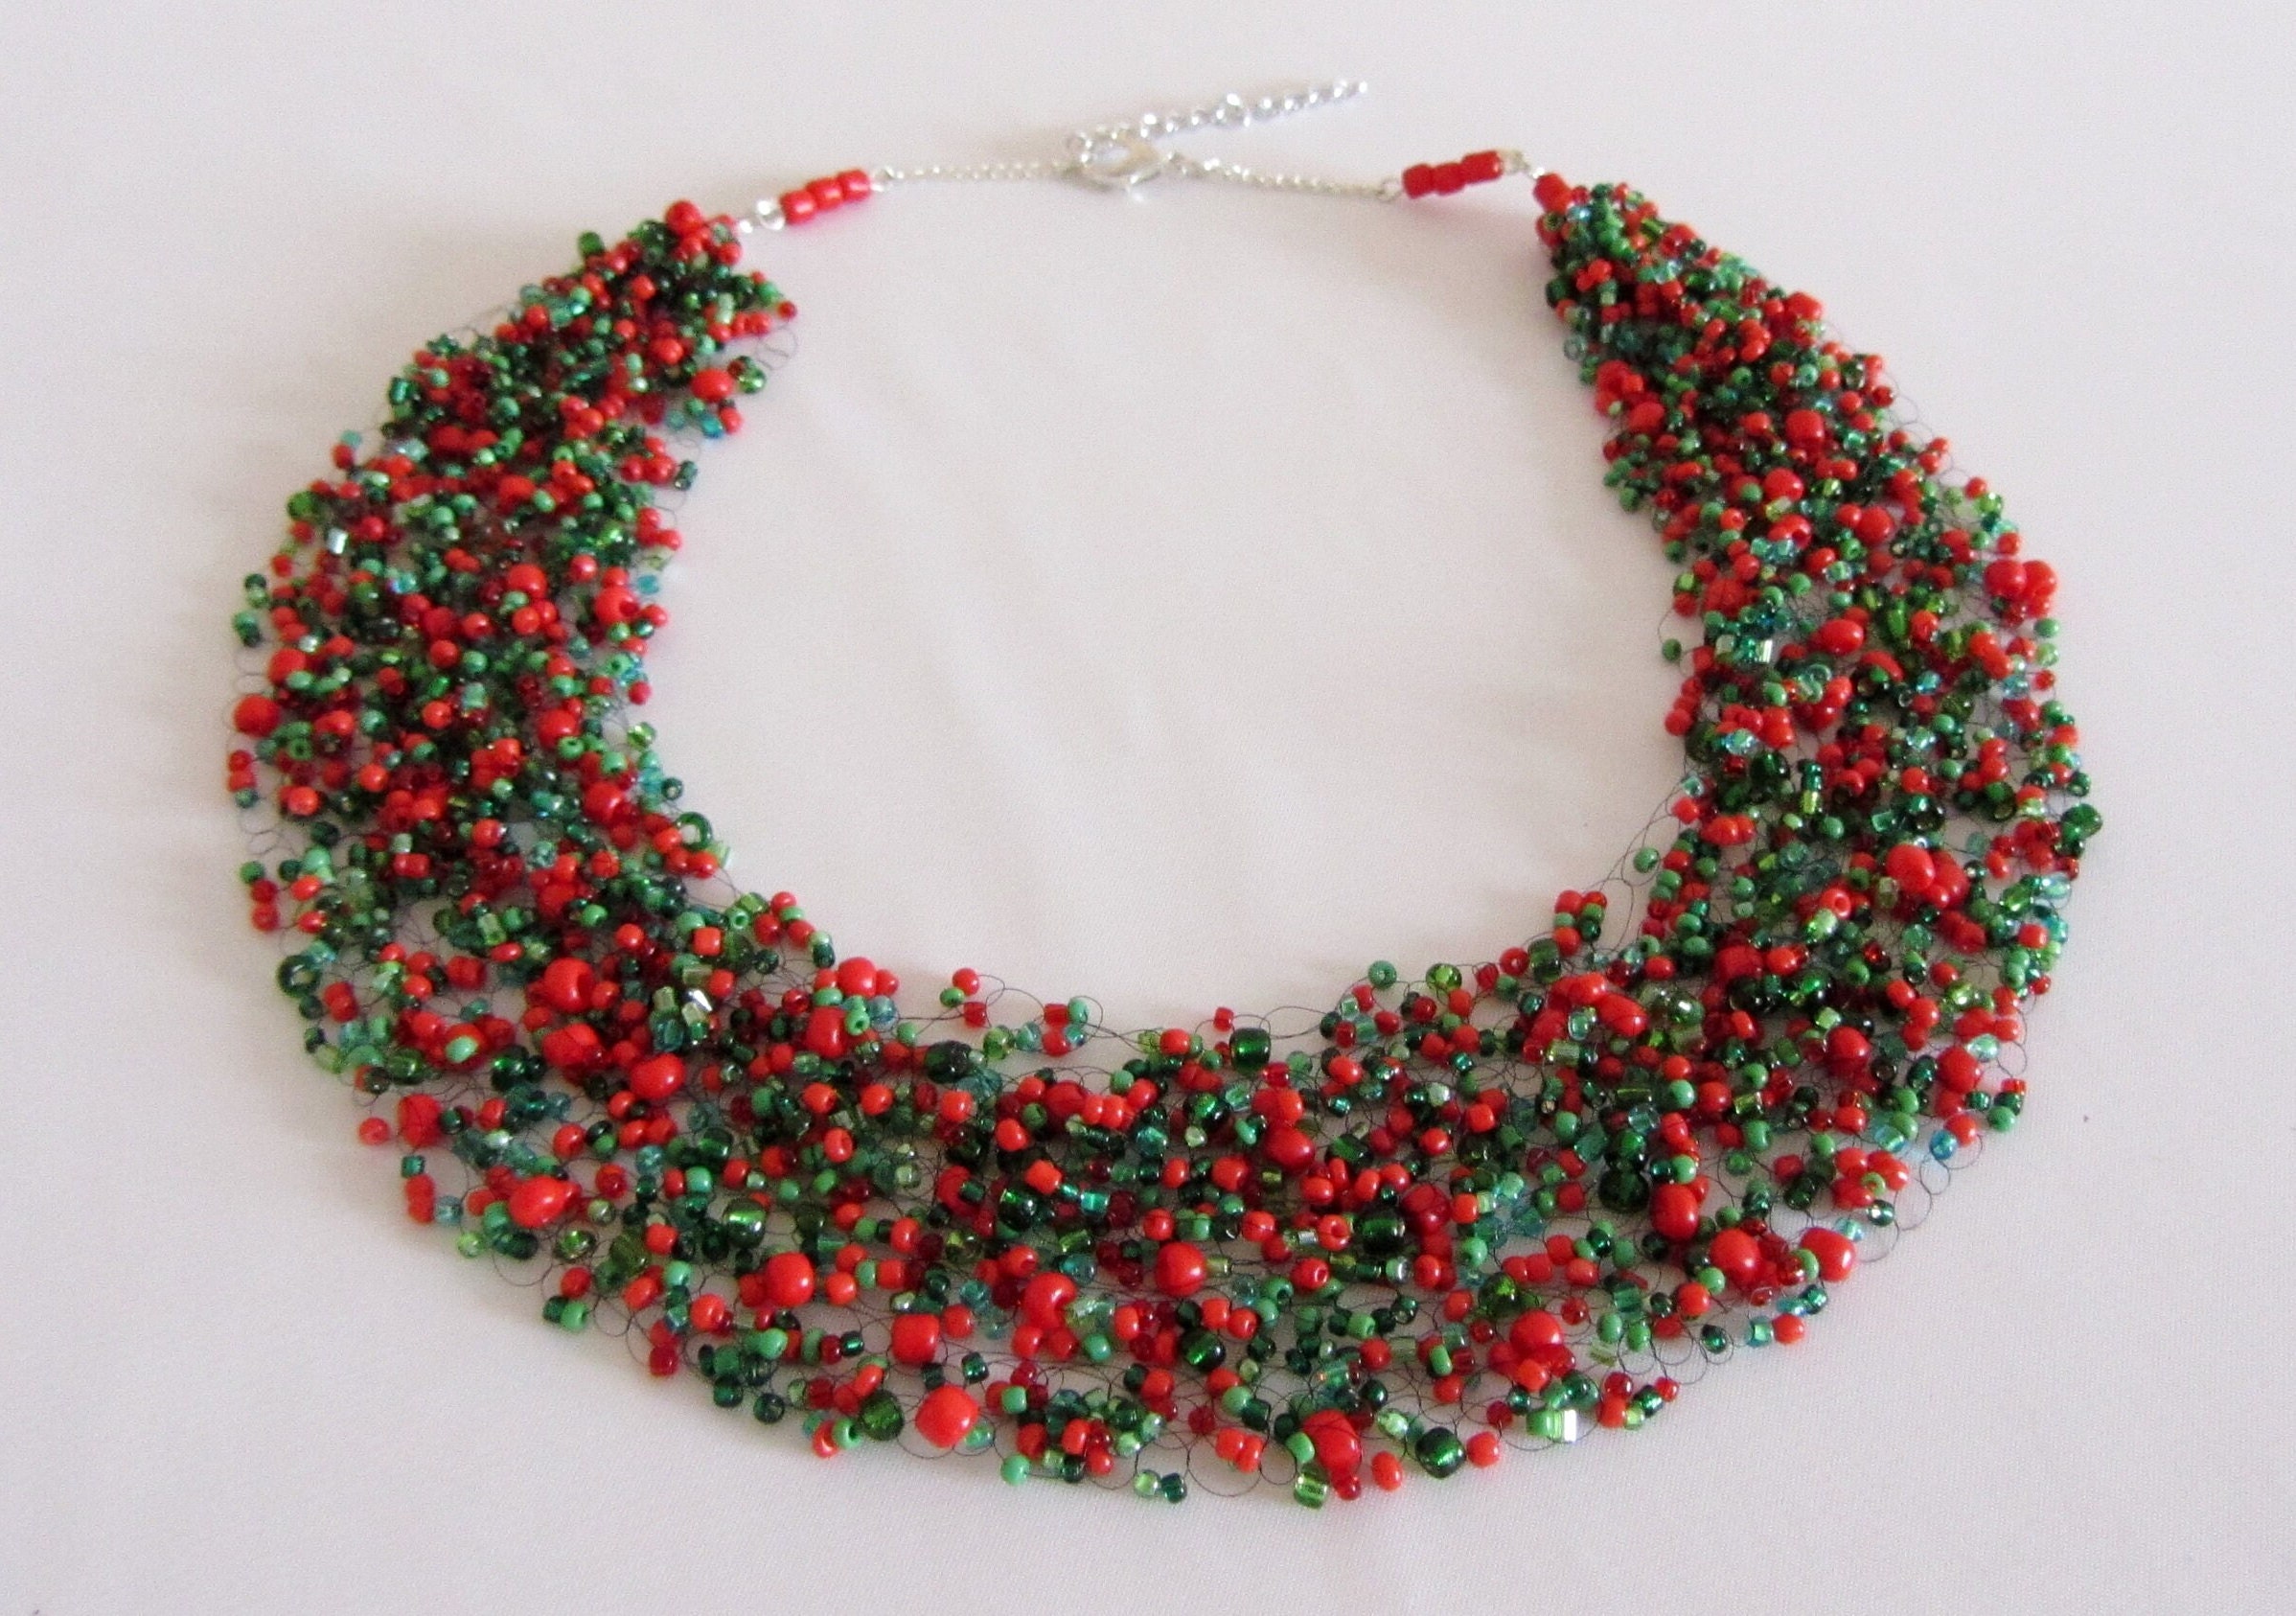 Christmas Pearl Beads, Red Green Gold Silver Pearls , 100-120